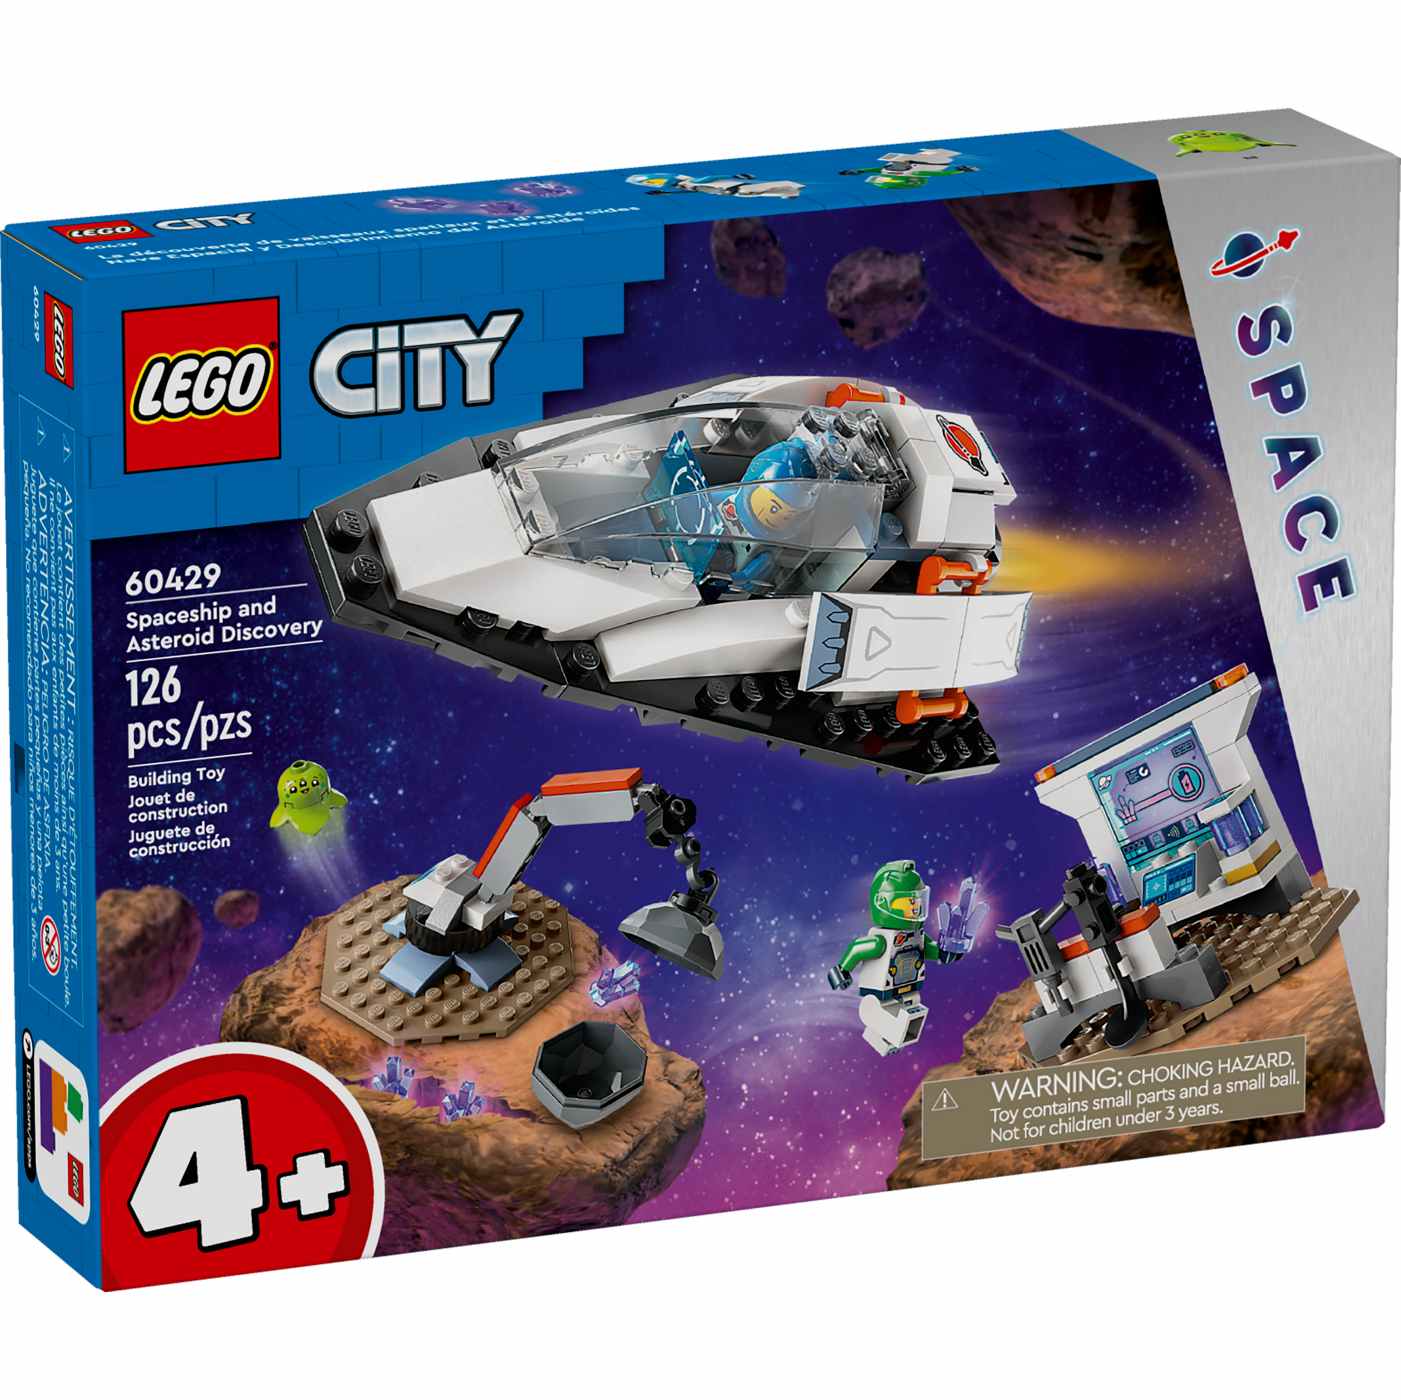 LEGO City Spaceship & Asteroid Discovery Set; image 1 of 2